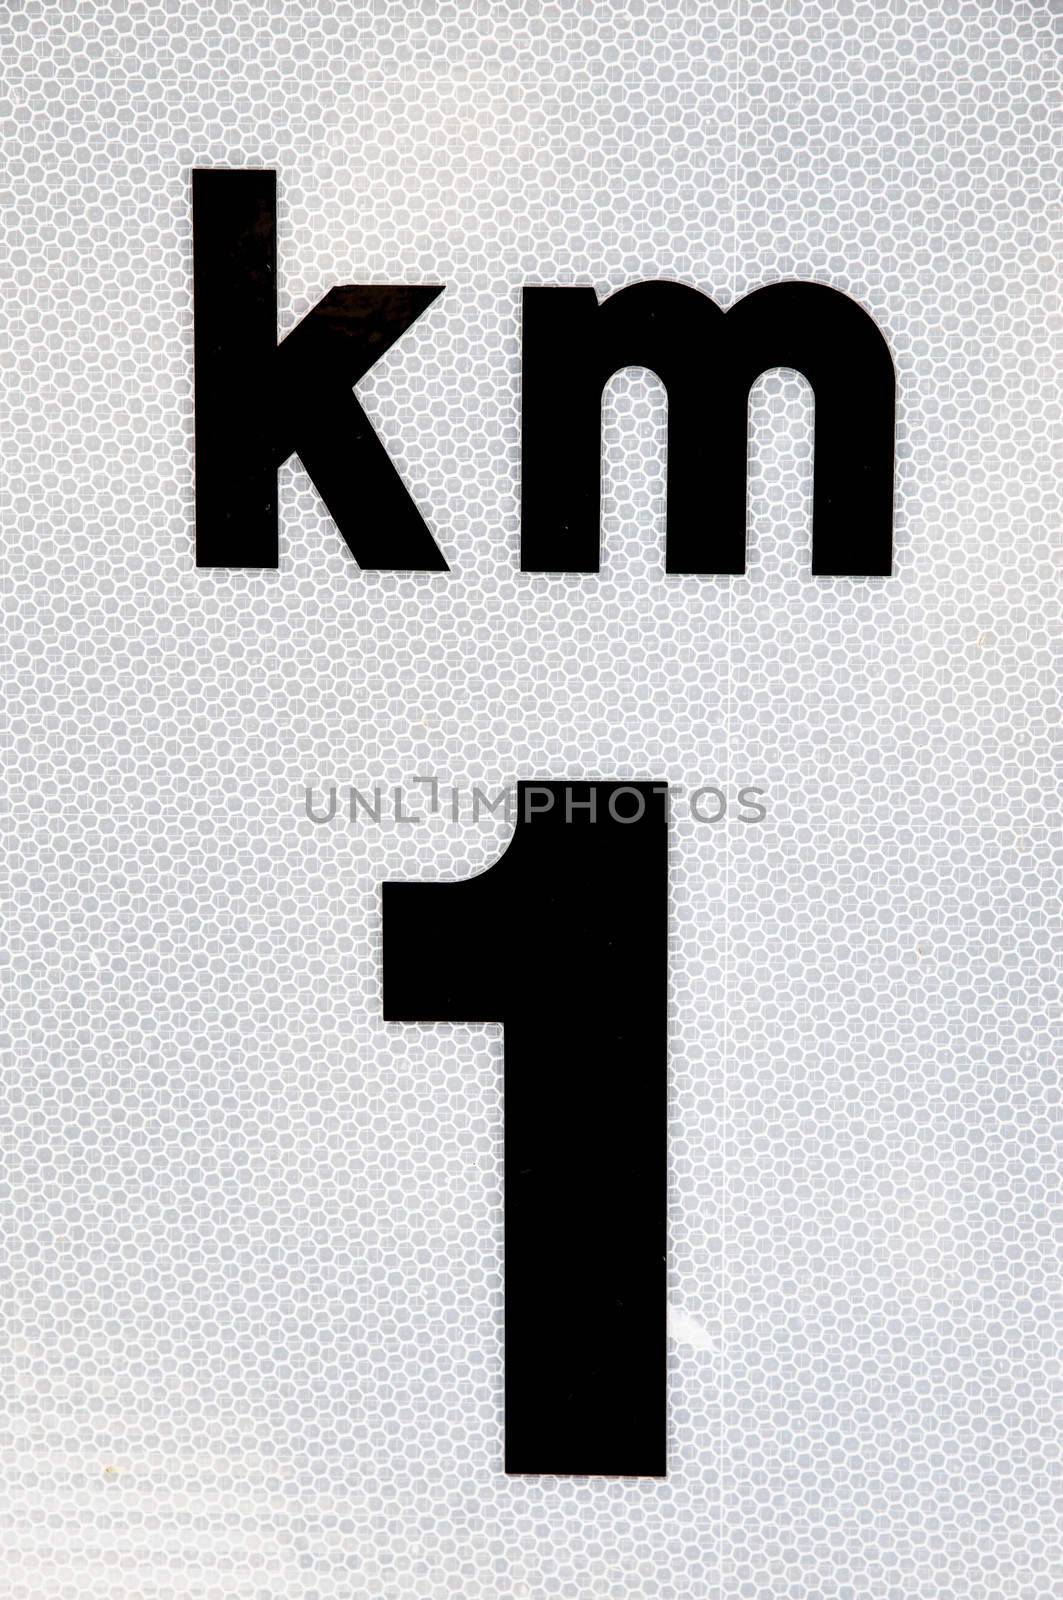 kilometer sign on a bright background